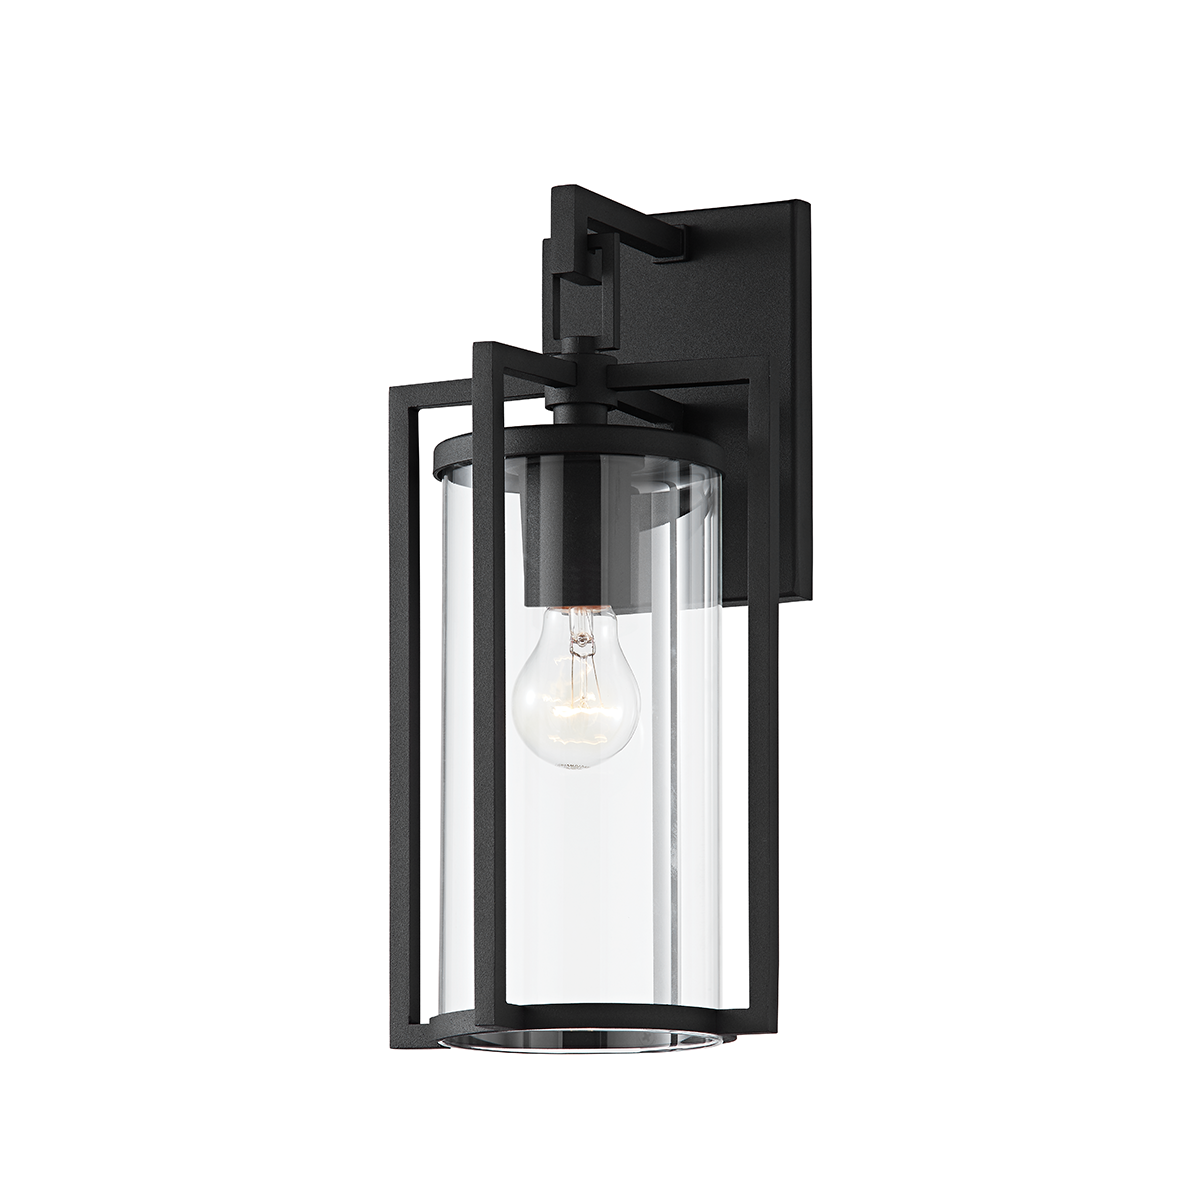 Troy Lighting 1 LIGHT SMALL EXTERIOR WALL SCONCE B1141 Outdoor l Wall Troy Lighting TEXTURE BLACK  